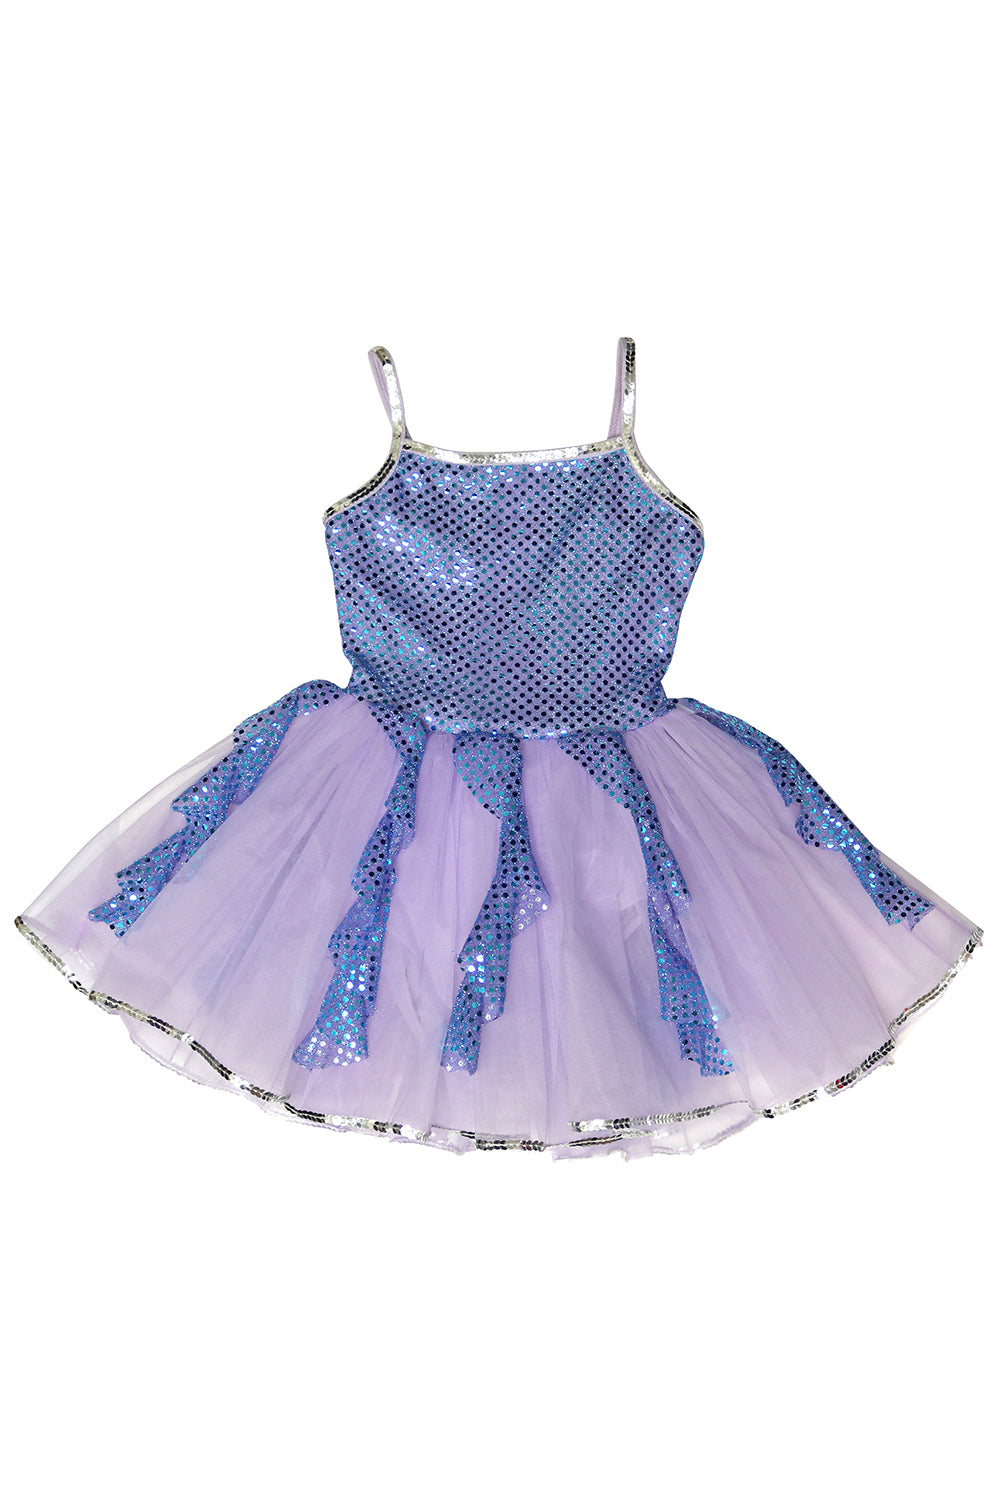 Sequin Camisole Shift Dress For Dance